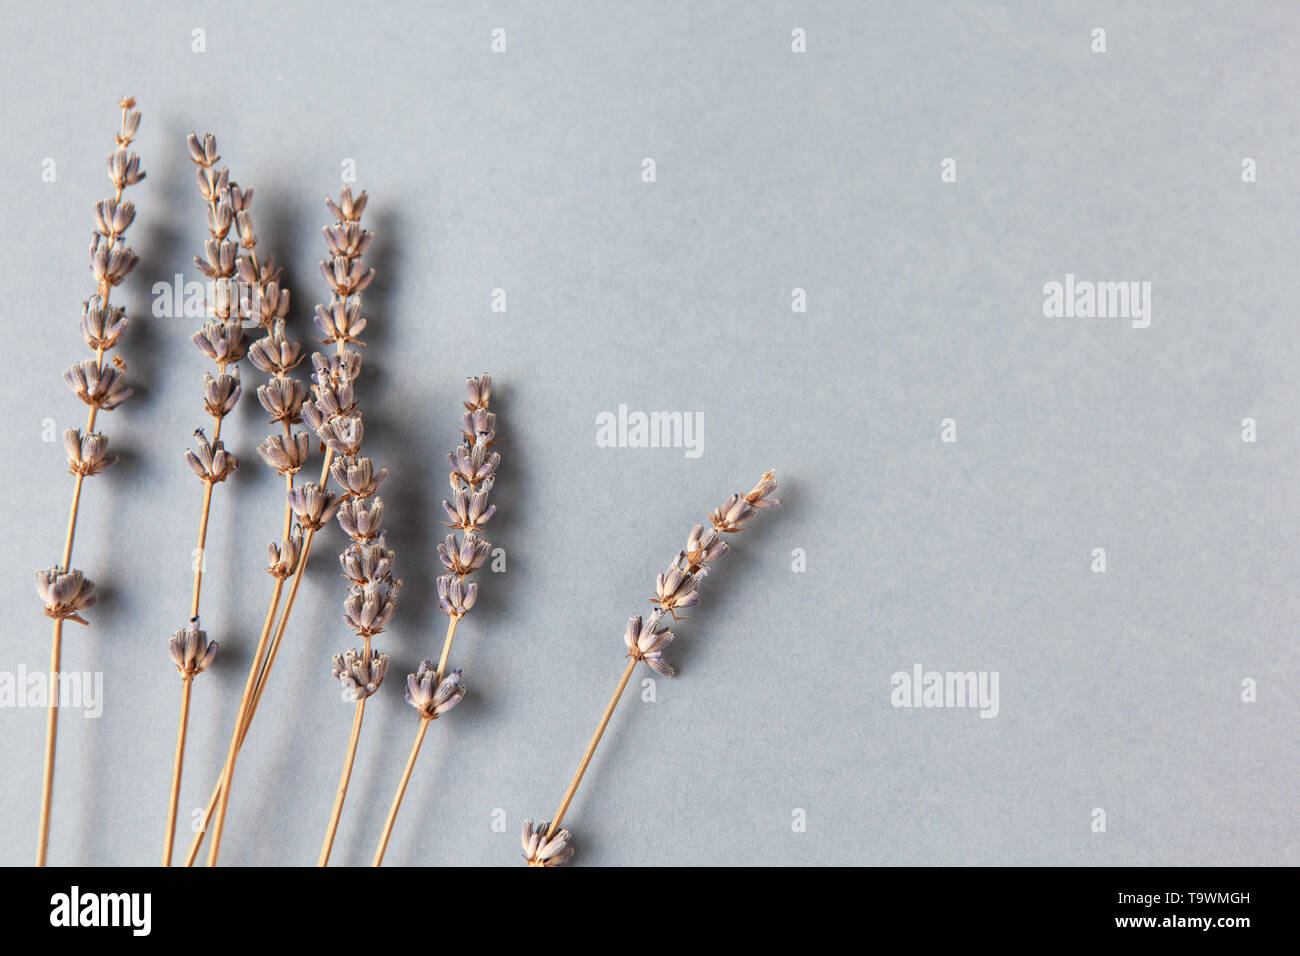 Lavender branches on grey background, copy space. Bottom location. Minimalistic flat lay. Horizontal. Image for social media Stock Photo